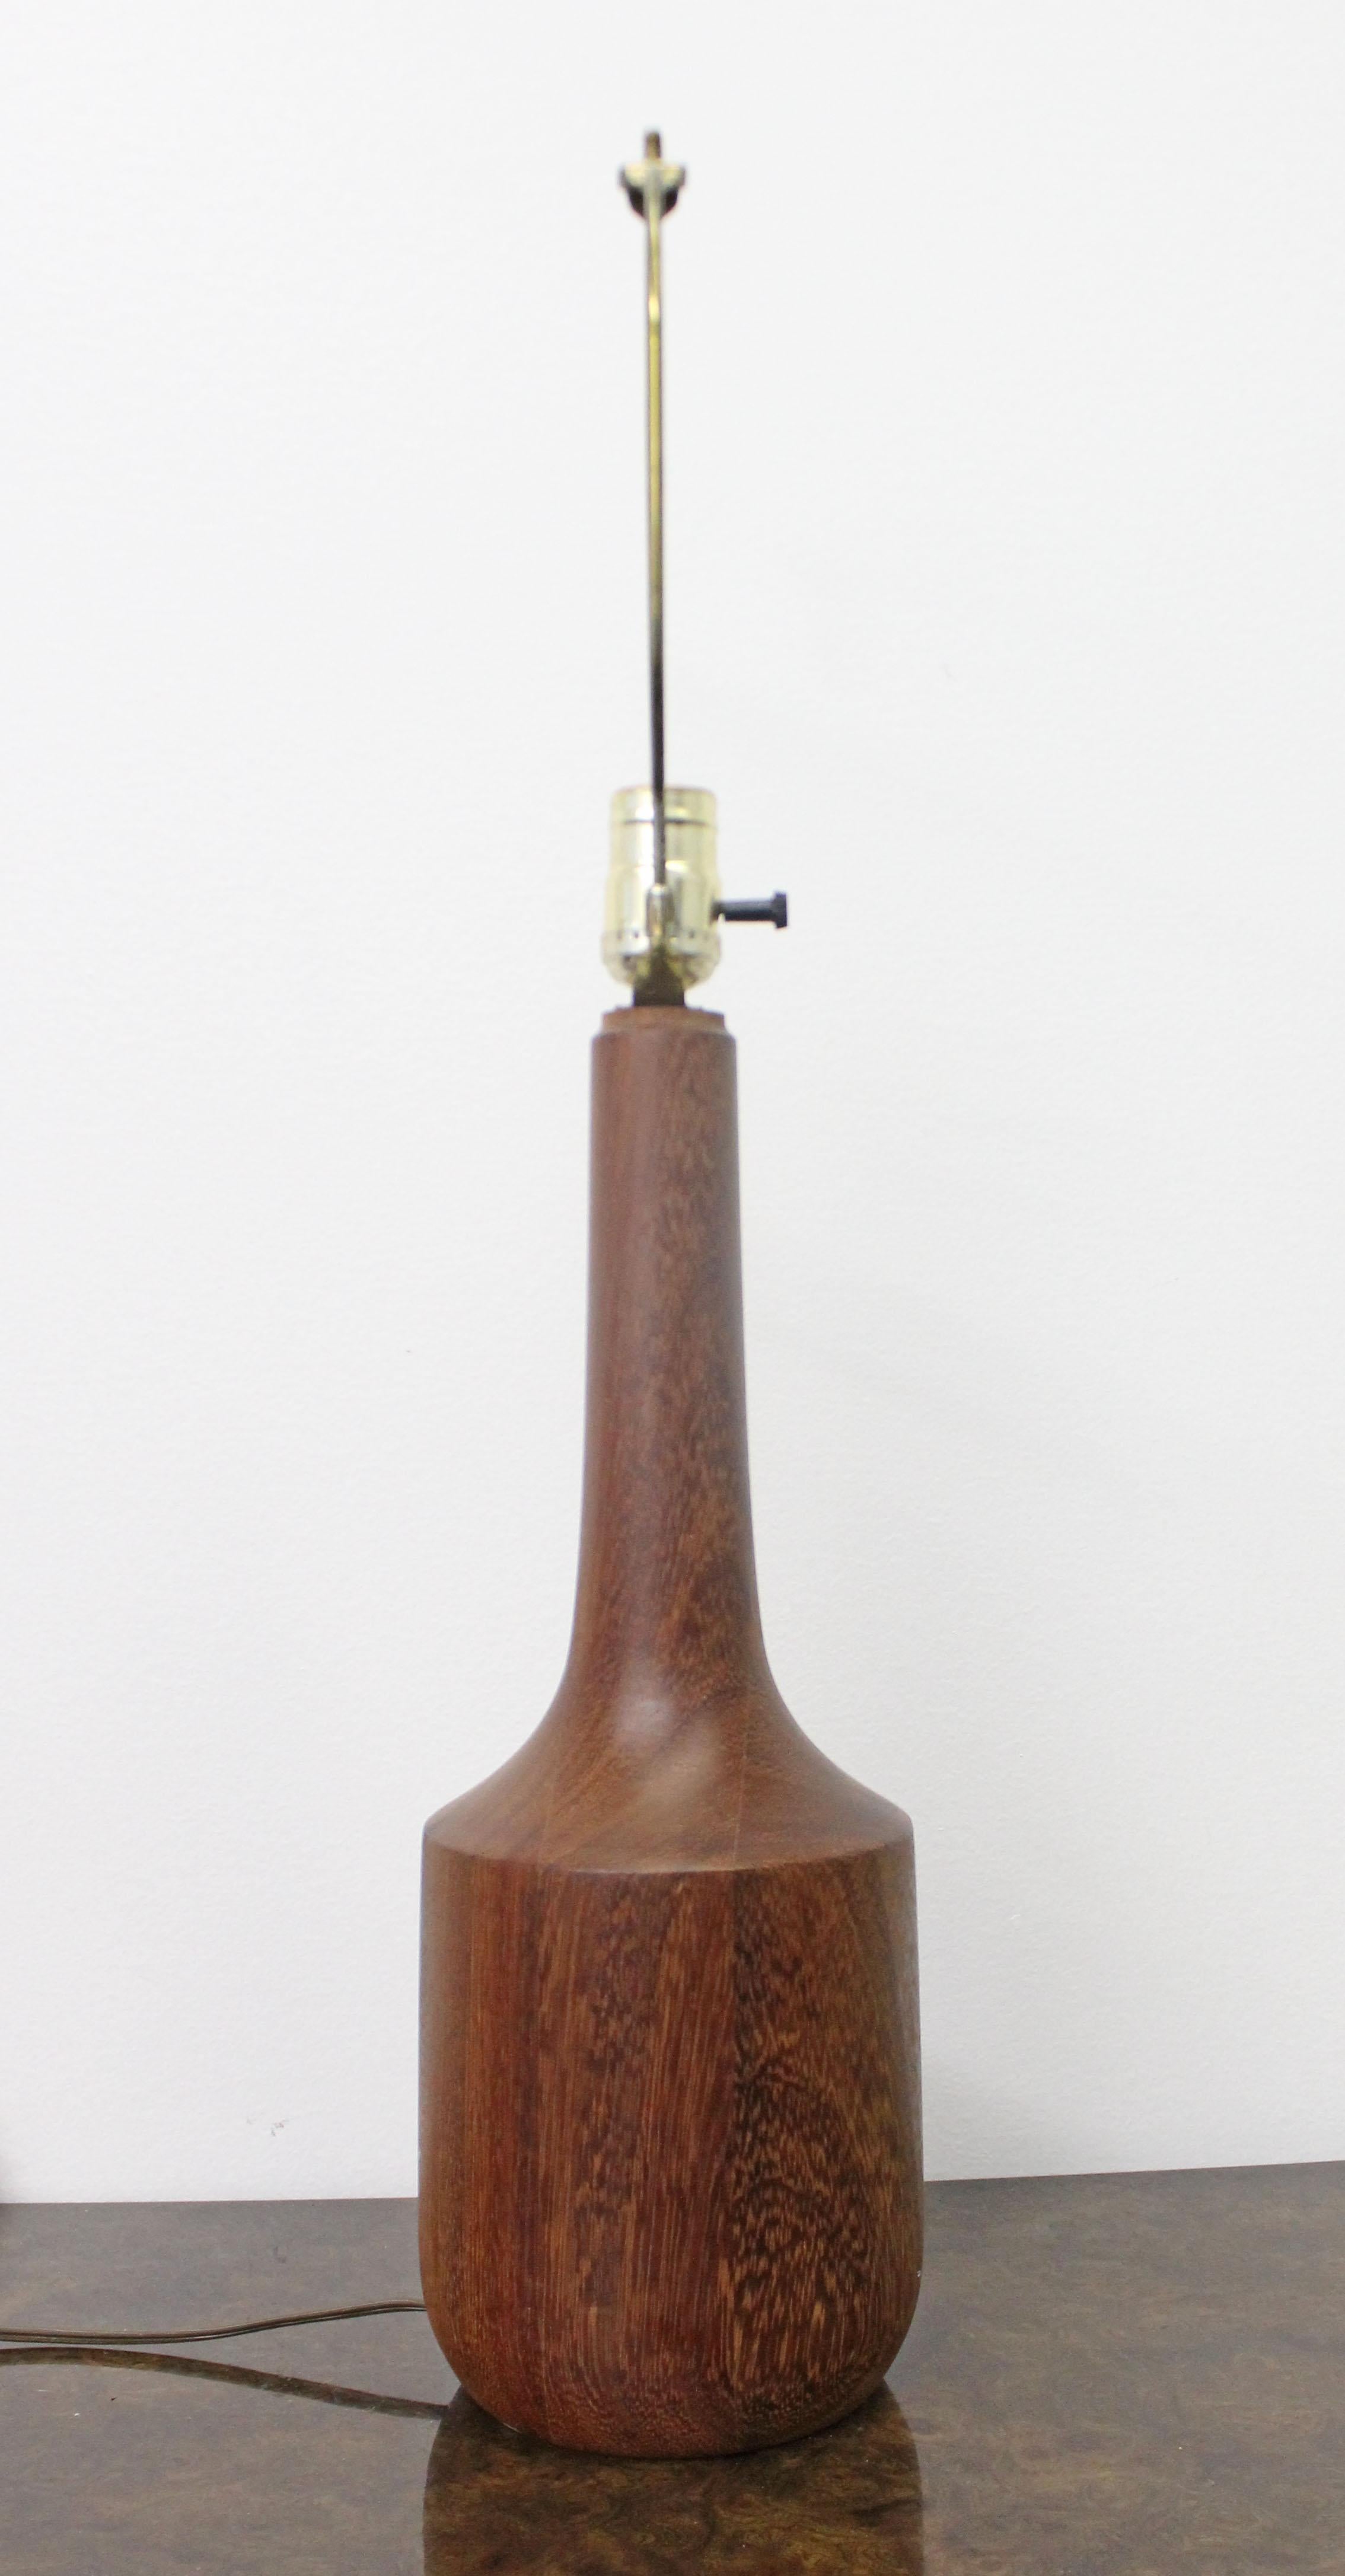 Offered is a bottle shaped vintage Danish modern teak table lamp. It is in good, working condition with small surface scratches on the wood and age wear on the brass. It is not signed. A great piece to add to any room in your home.